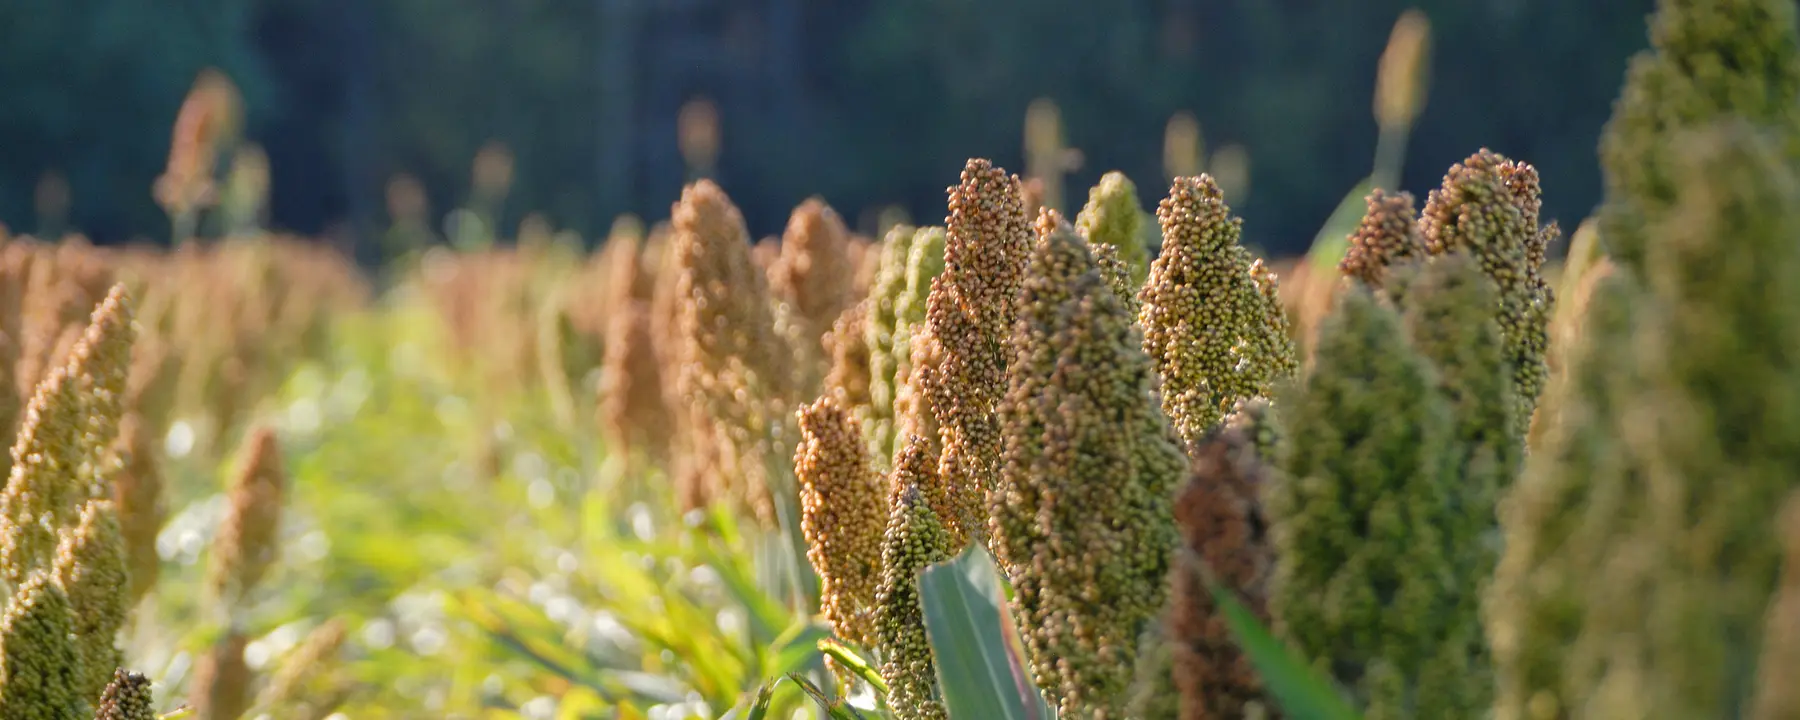 Closeup of sorghum plants growing in a field.